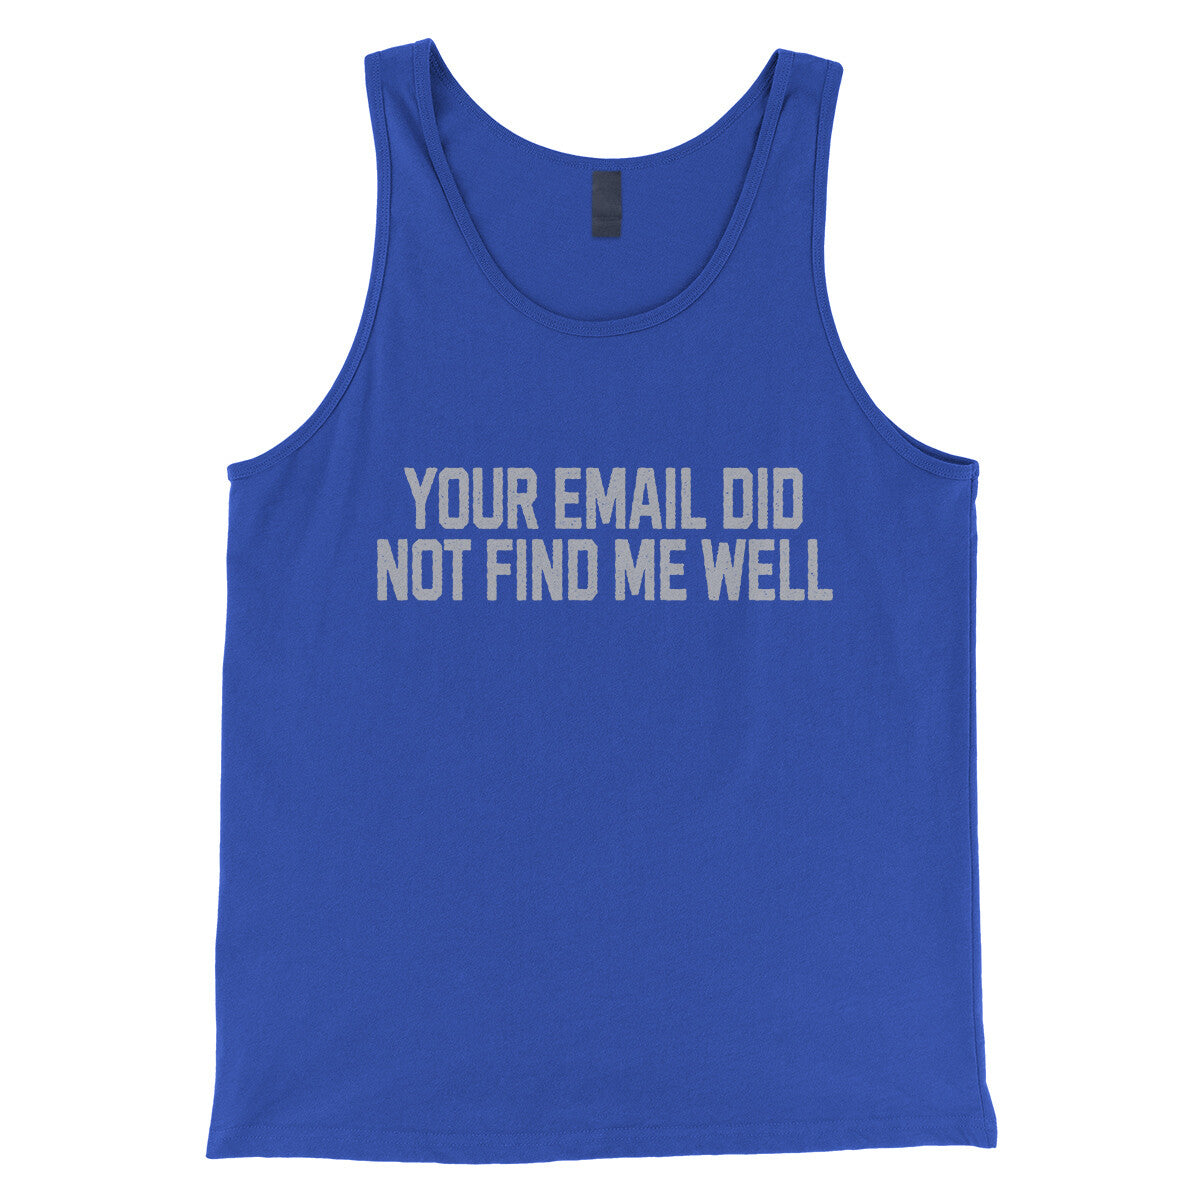 Your Email Did Not Find Me Well in True Royal Color